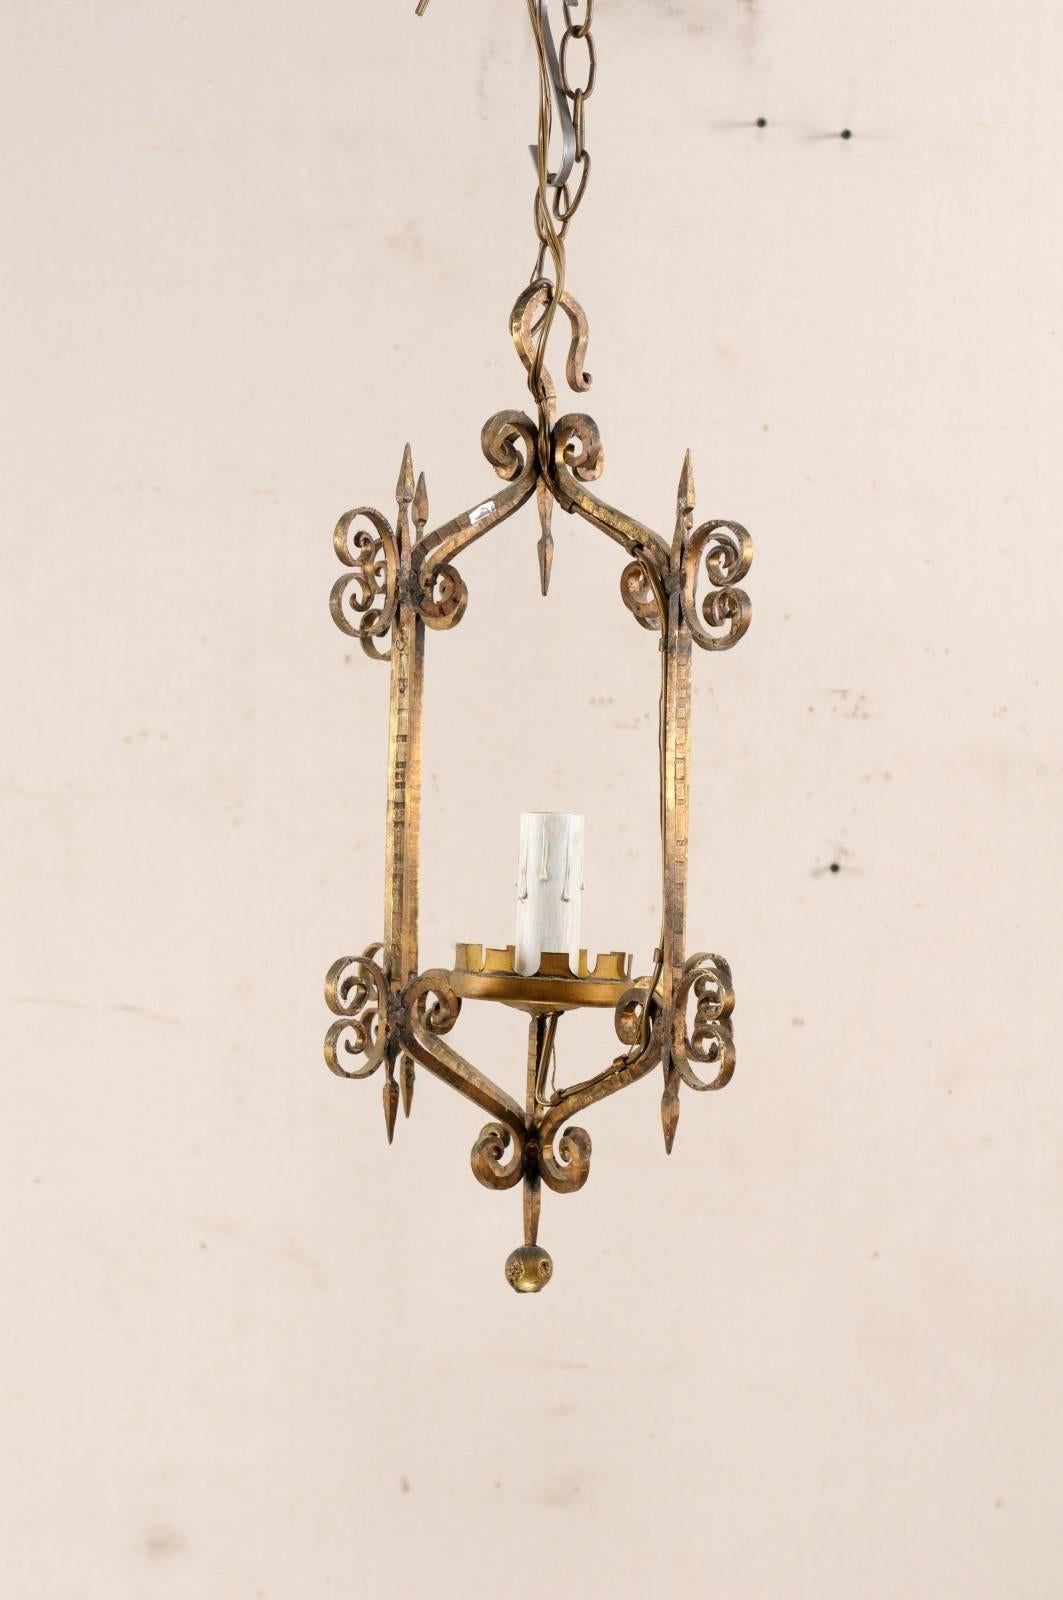 Patinated French Mid-20th Century Single Light Scrolled Iron Chandelier in Gold Bronze Hue For Sale